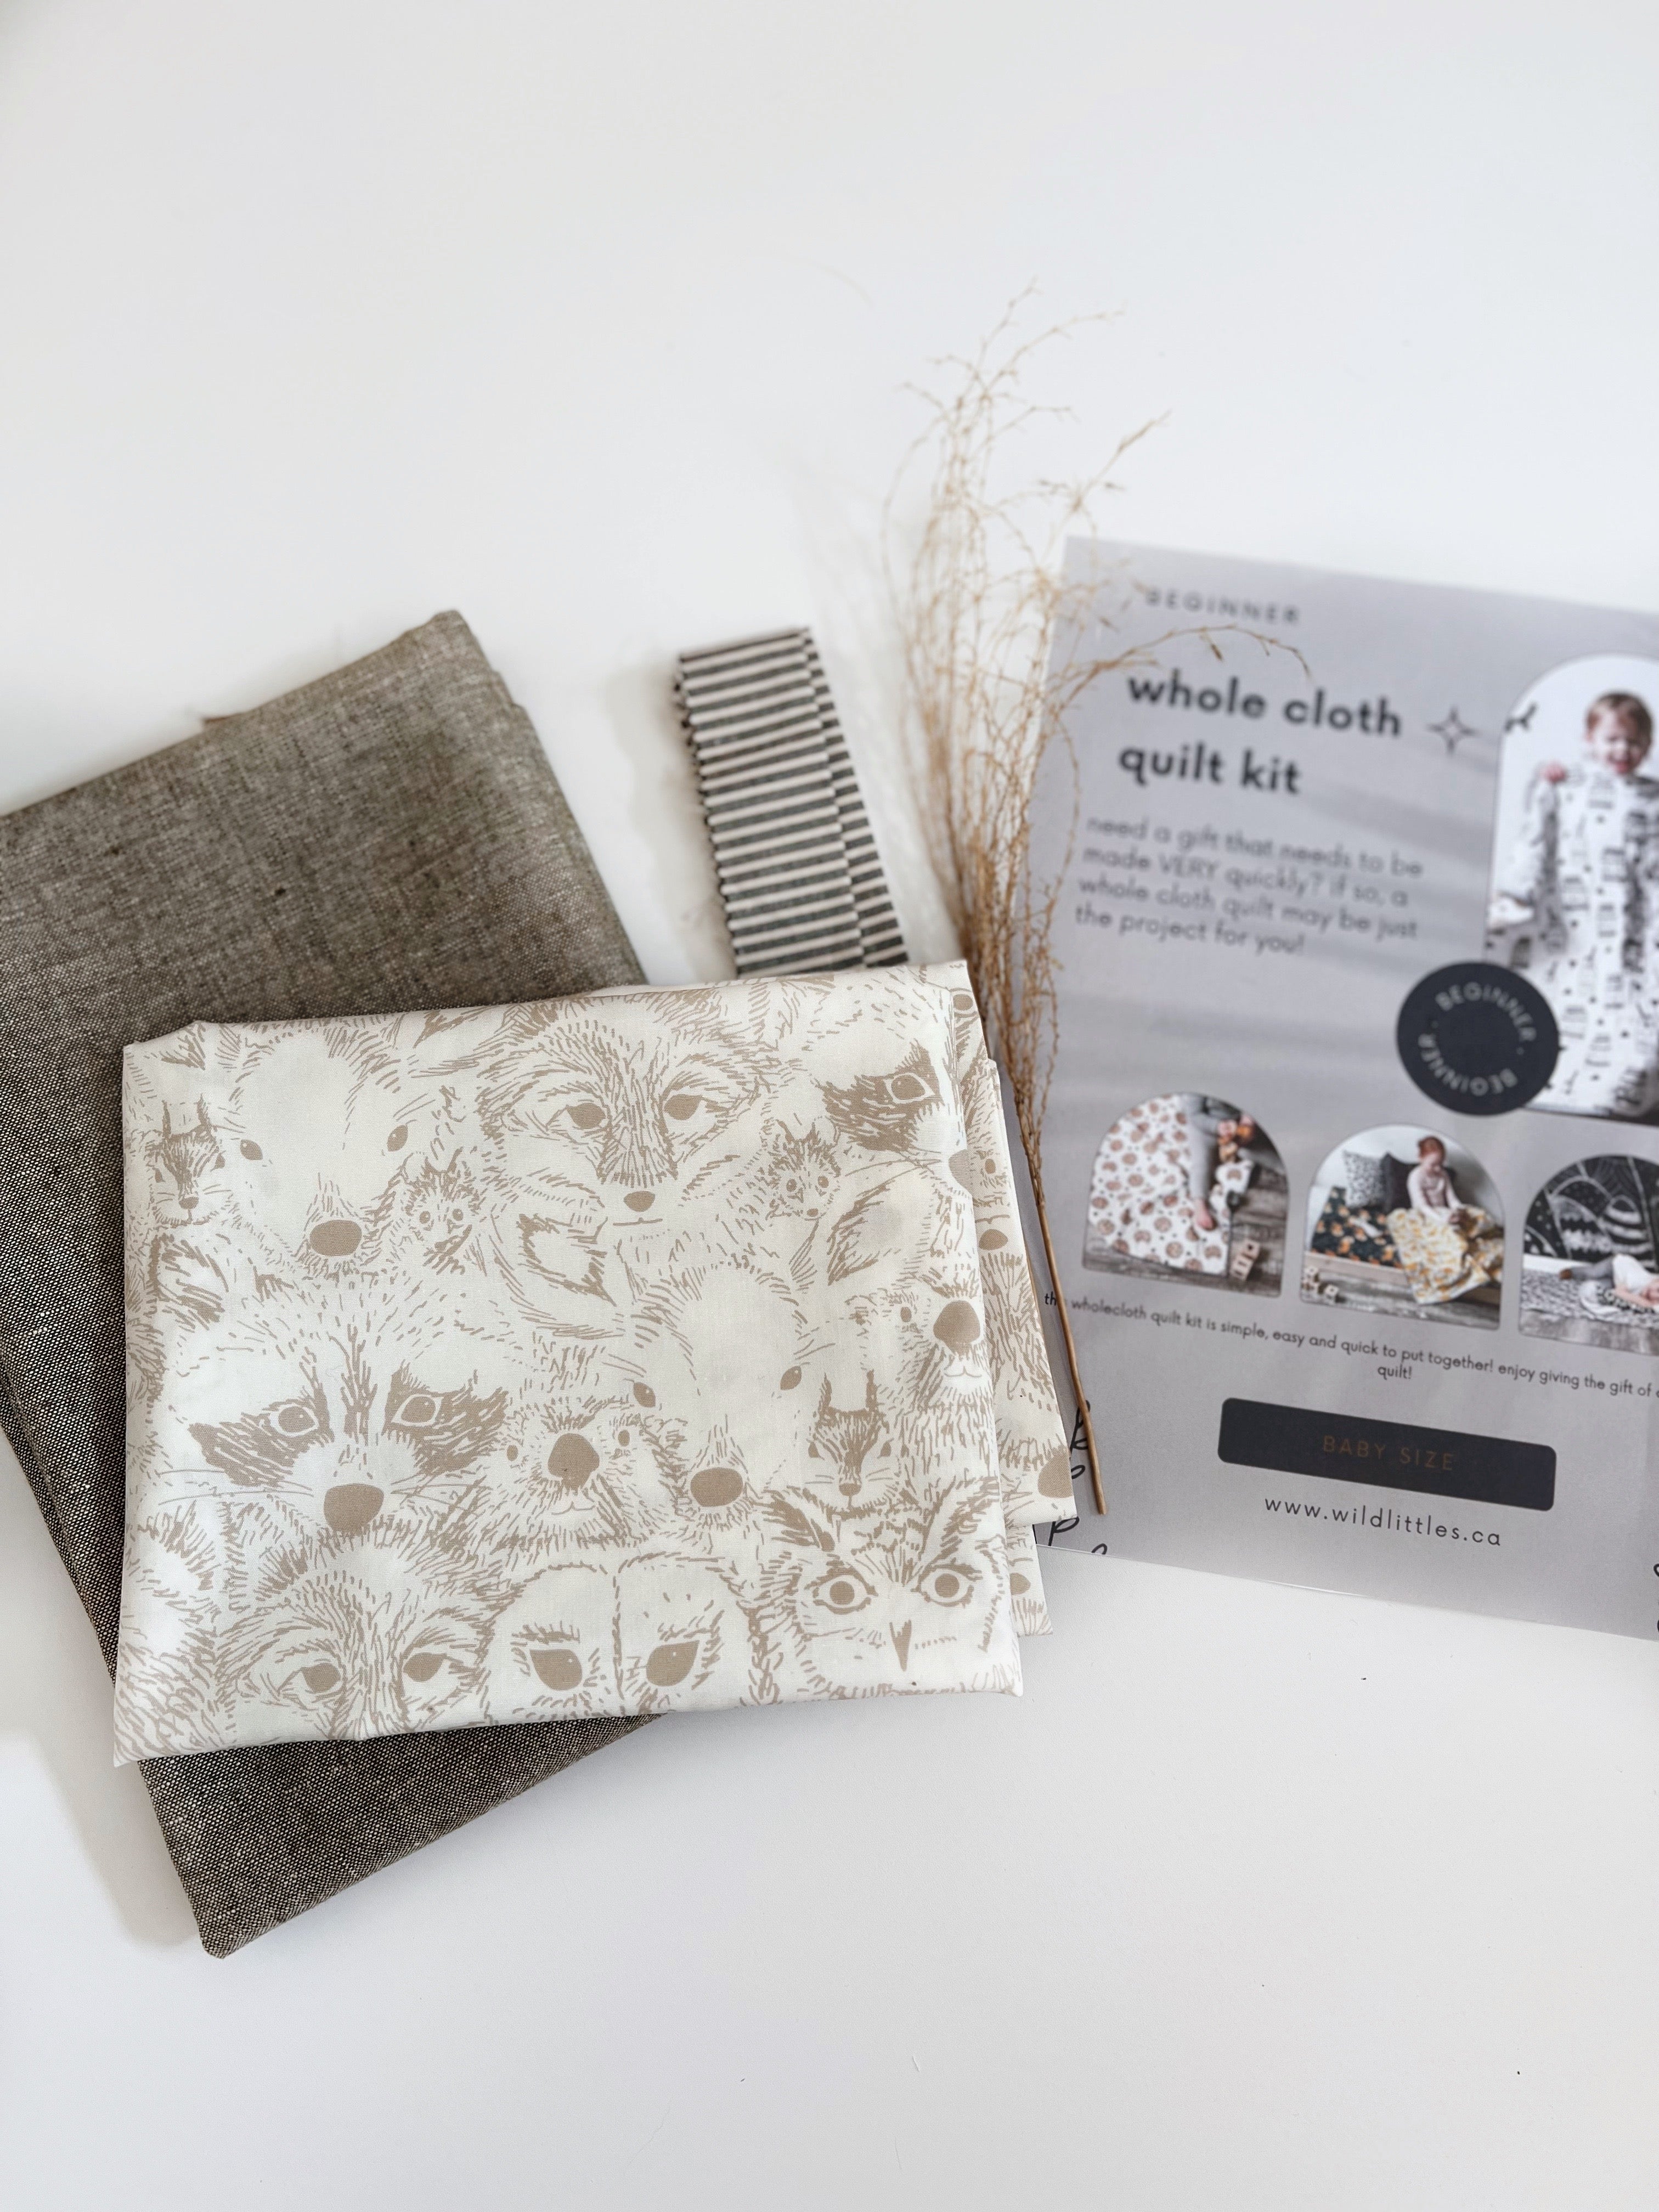 Whole Cloth Quilt Kit - animals in the wild | Wild Littles